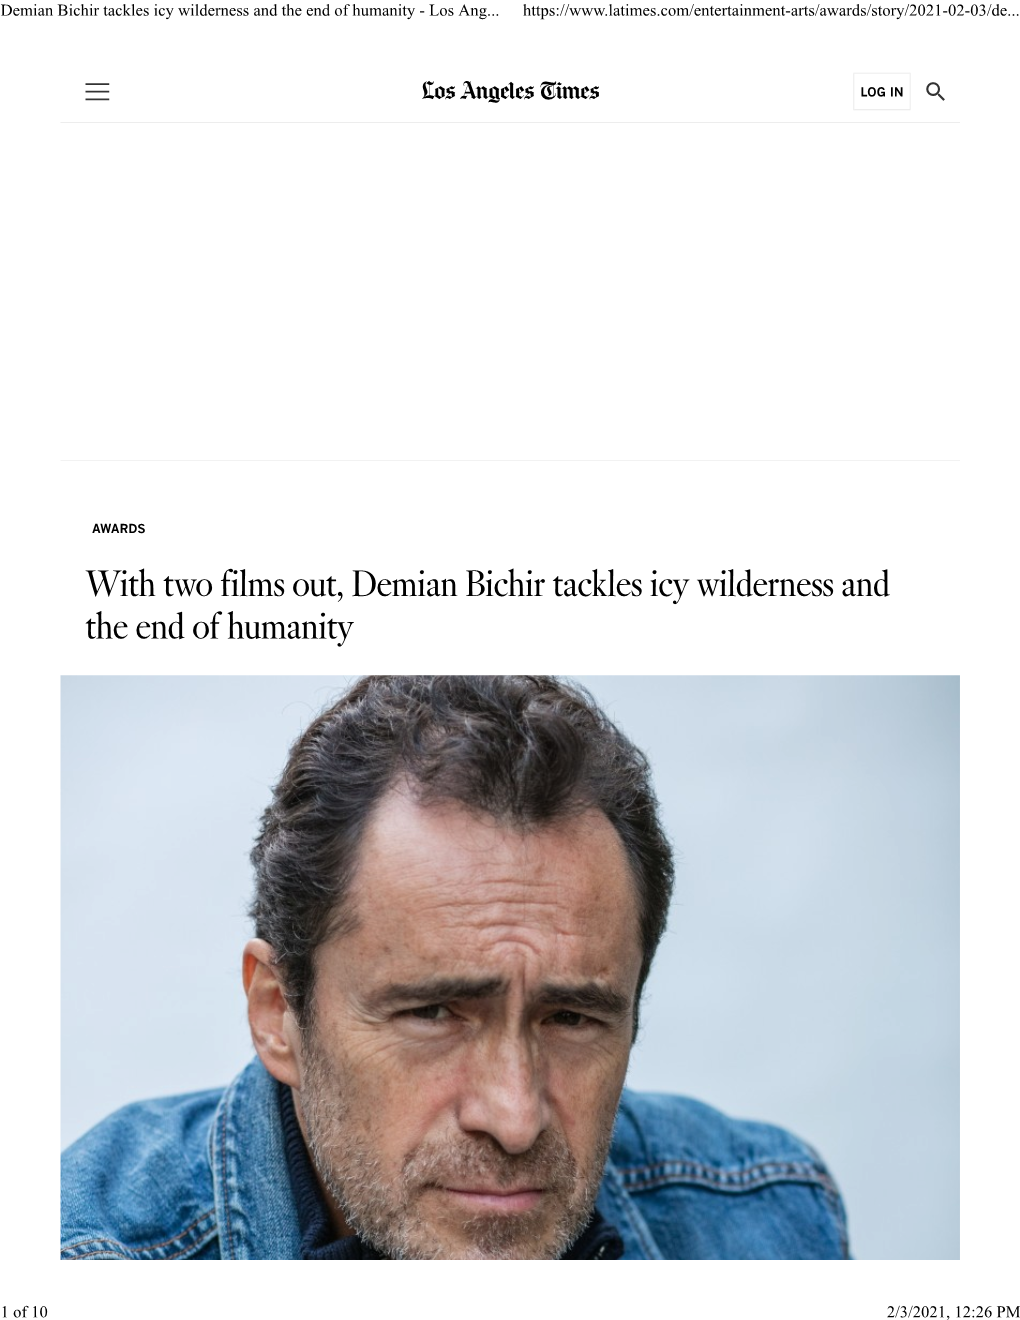 With Two Films Out, Demian Bichir Tackles Icy Wilderness and the End of Humanity